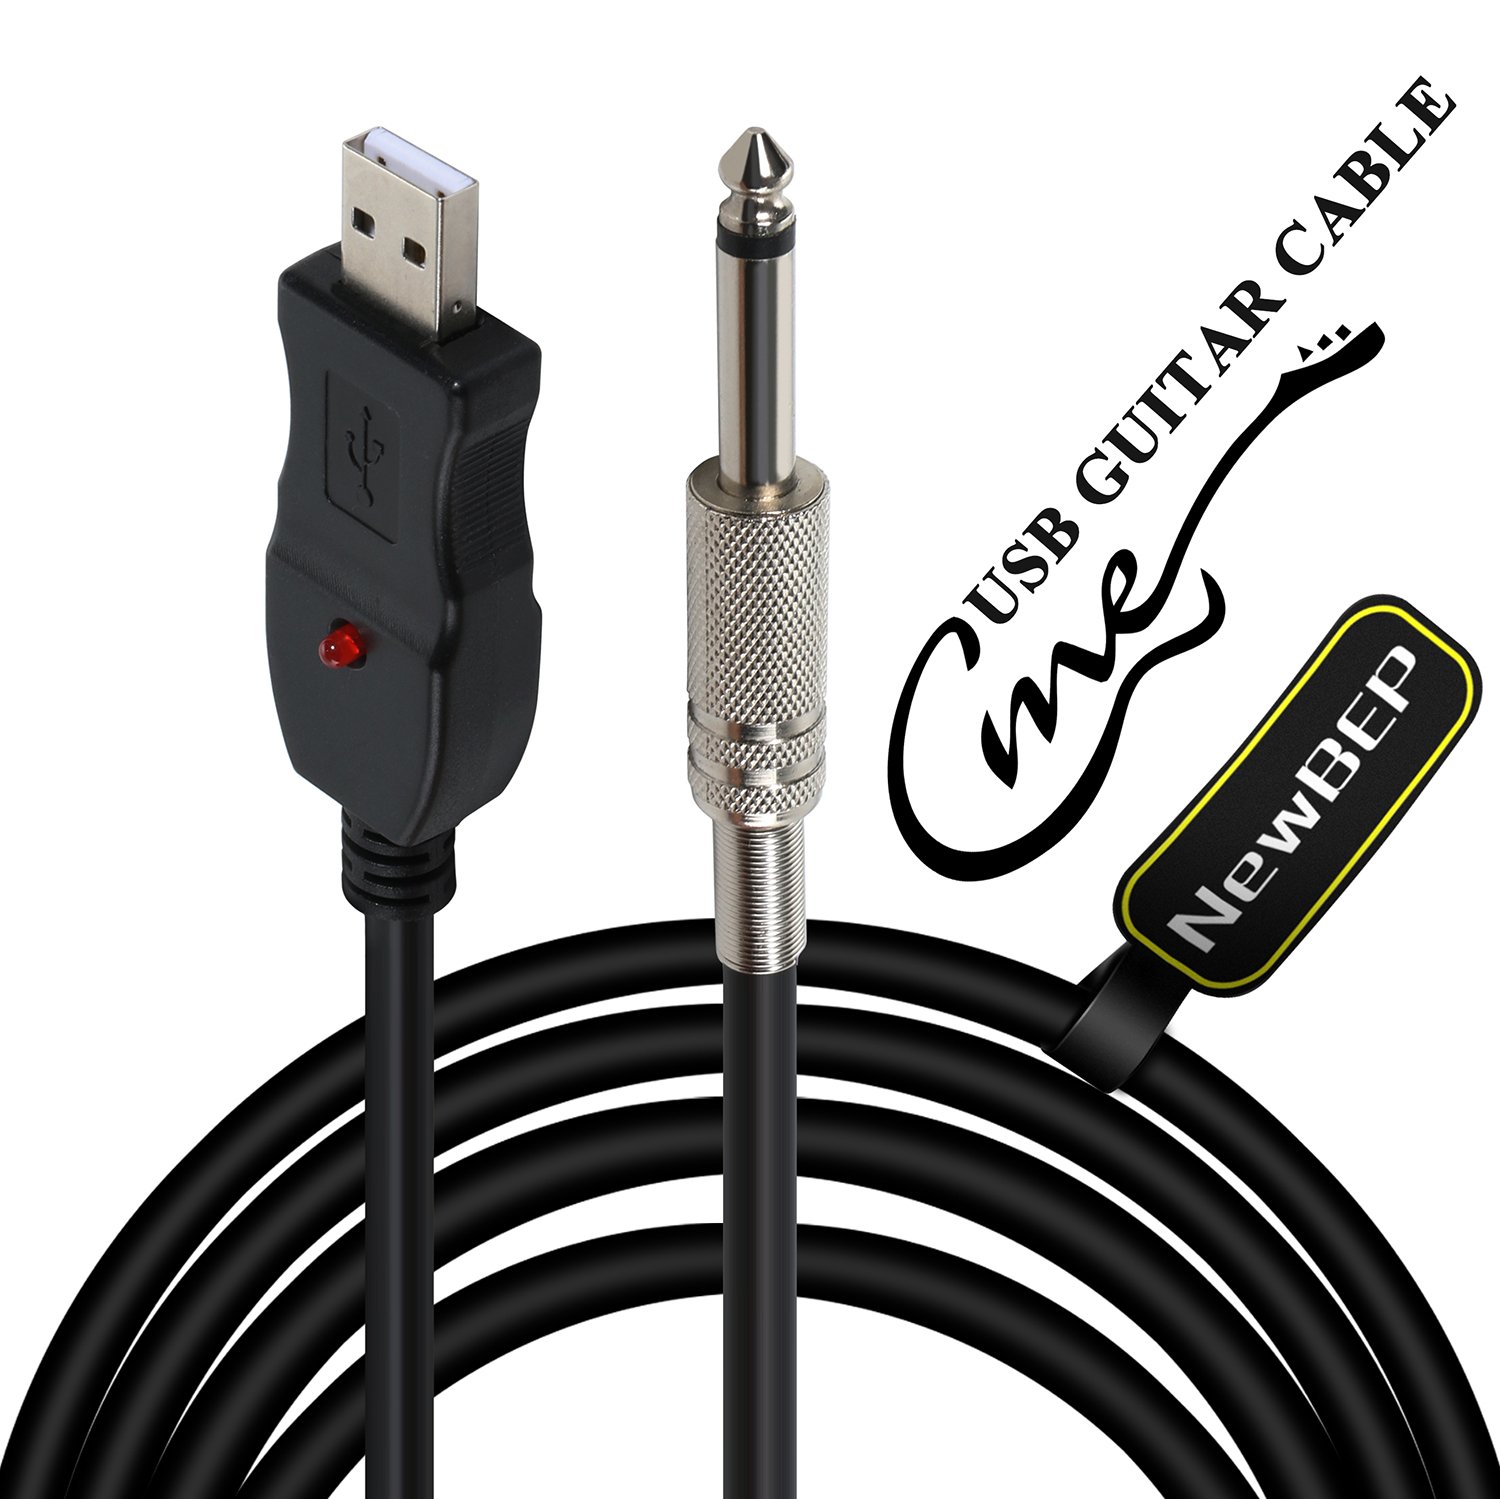 Unplugged USB cable